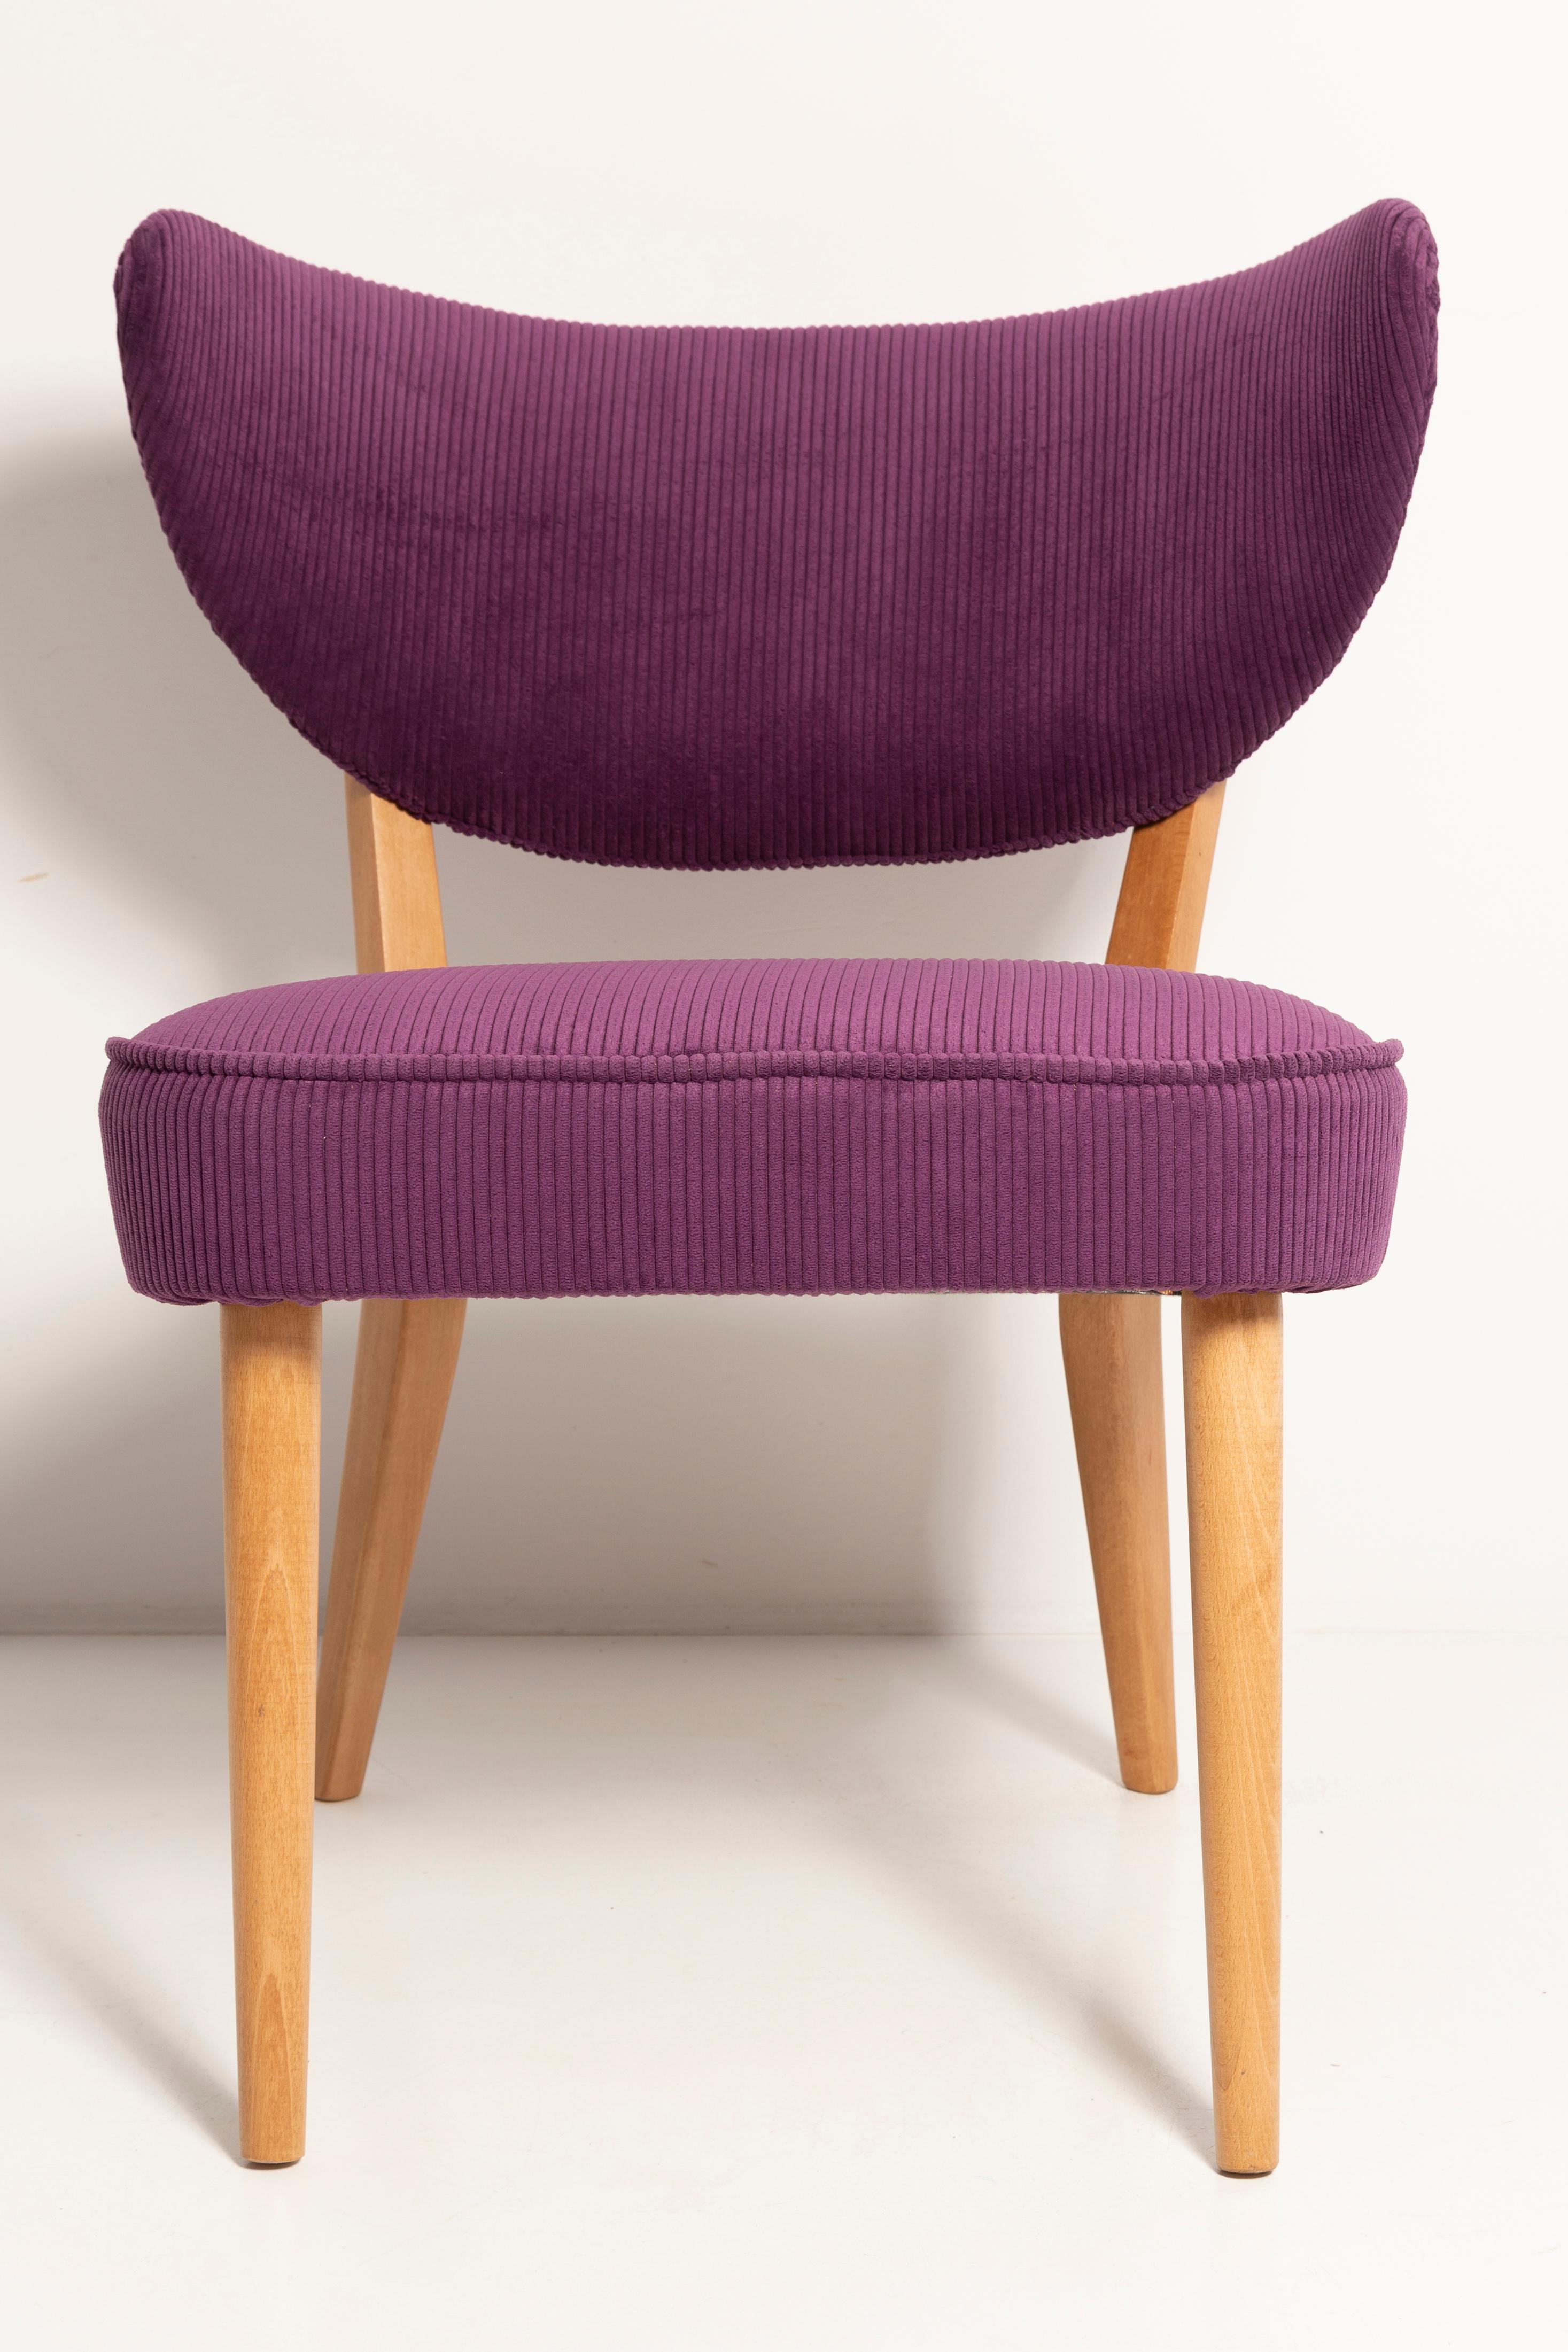 Midcentury Style Violet Velvet Club Chair, by Vintola Studio, Europe, Poland For Sale 4